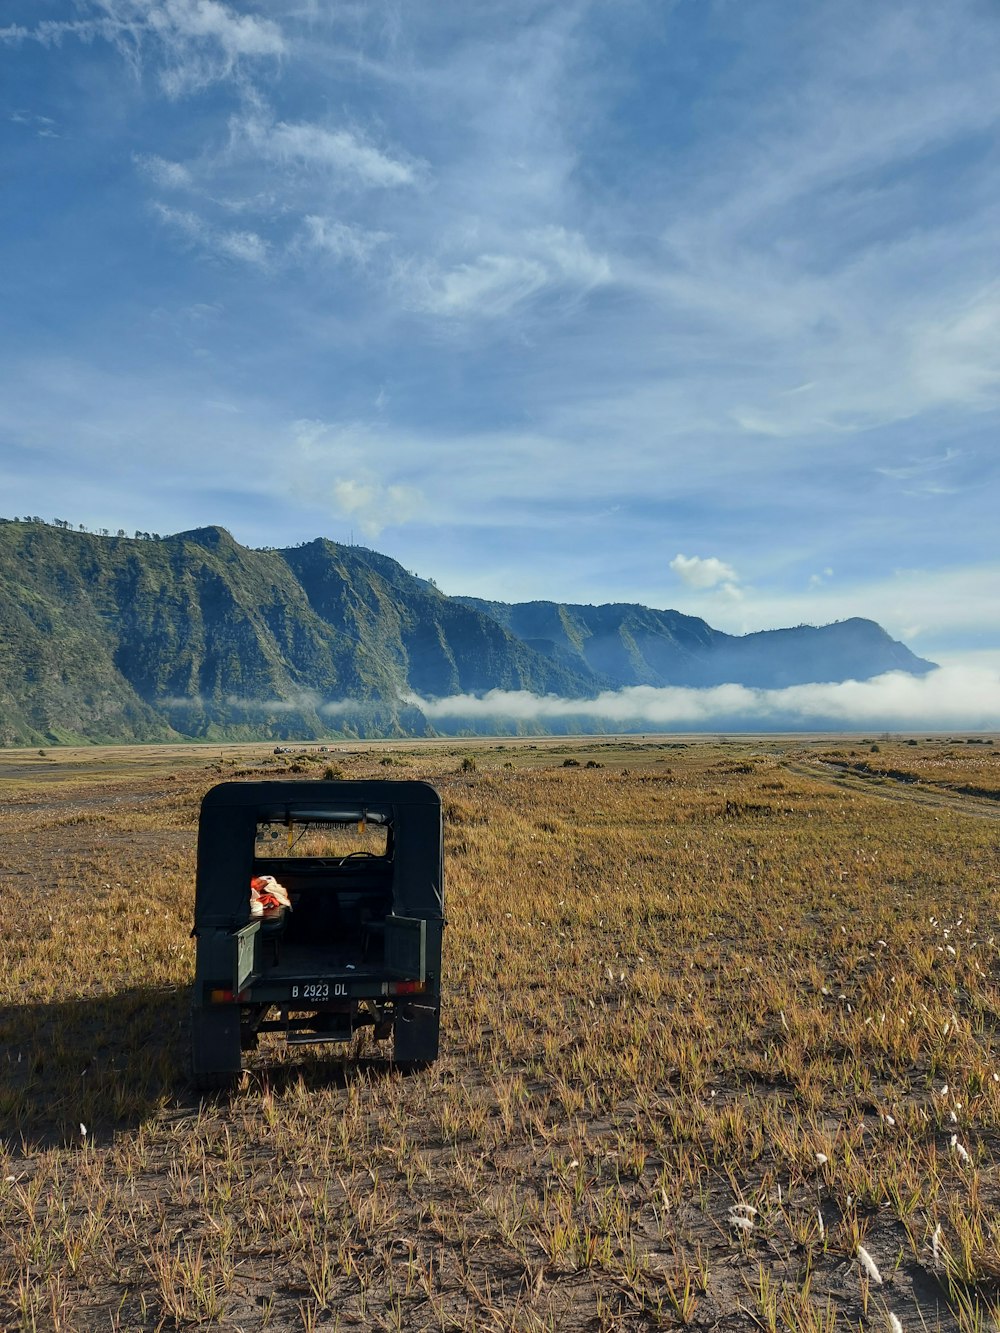 a truck in a field with mountains in the background